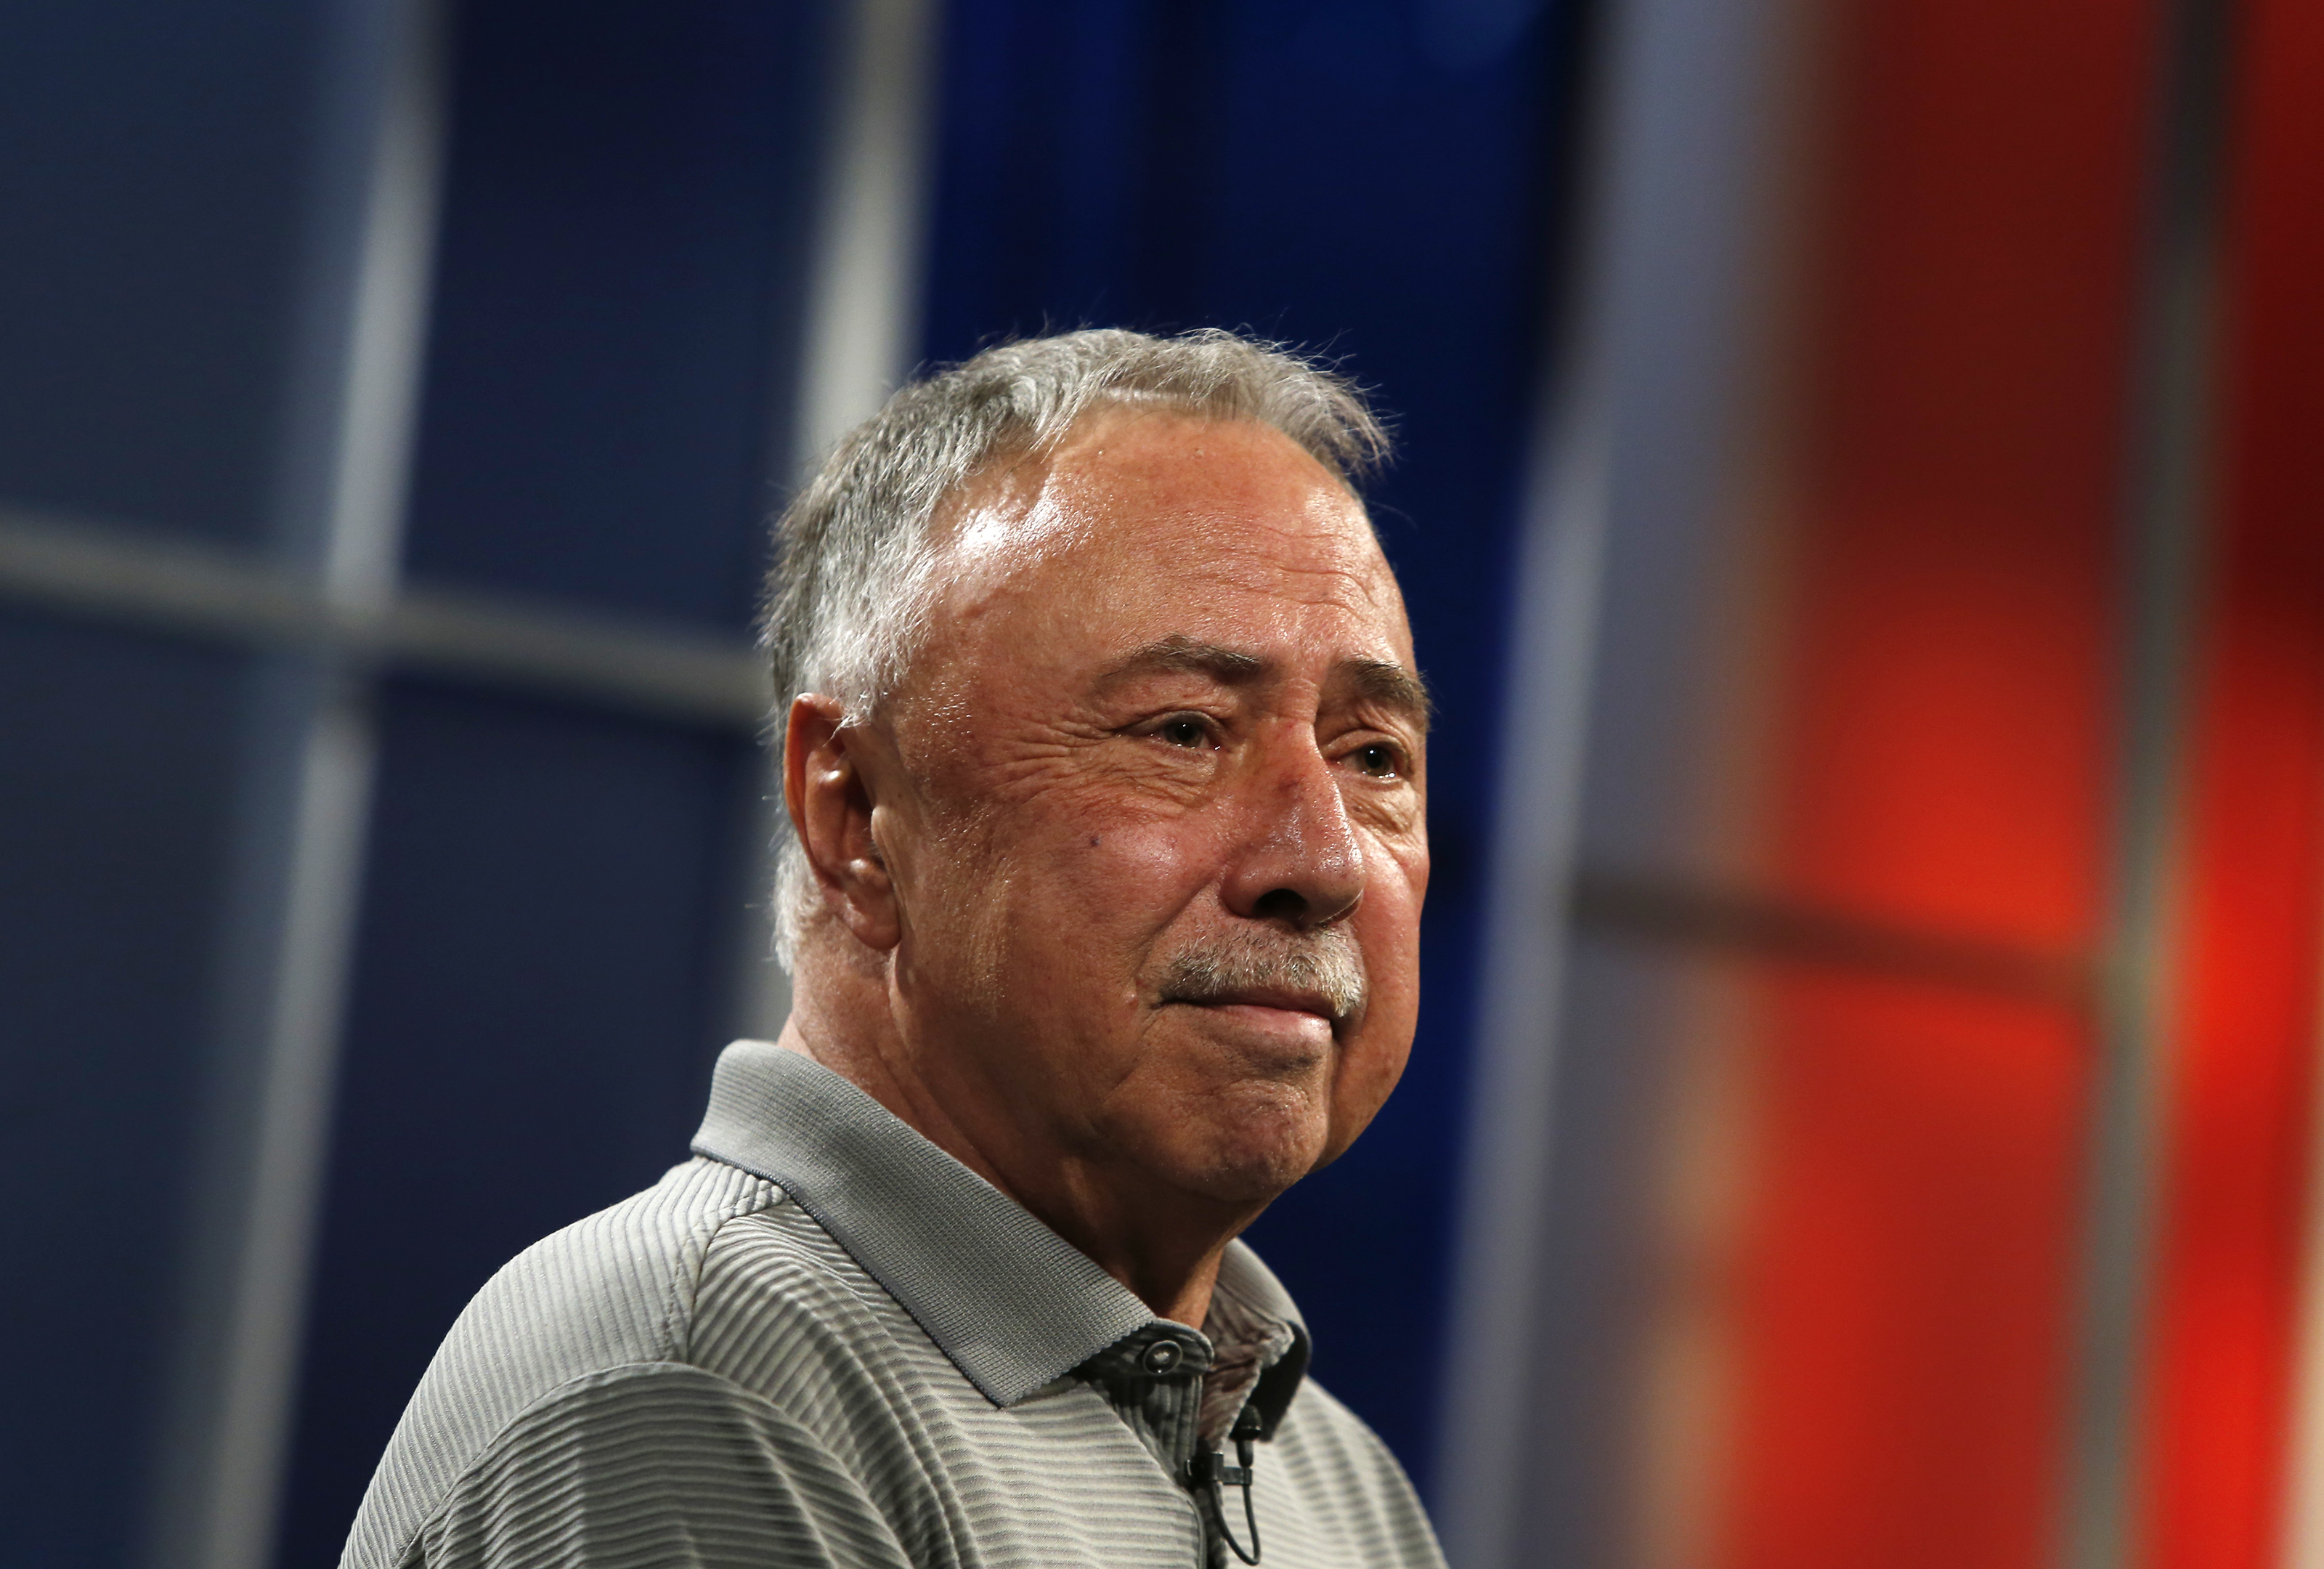 Jerry Remy, Red Sox Player and Longtime Commentator, Dies at 68